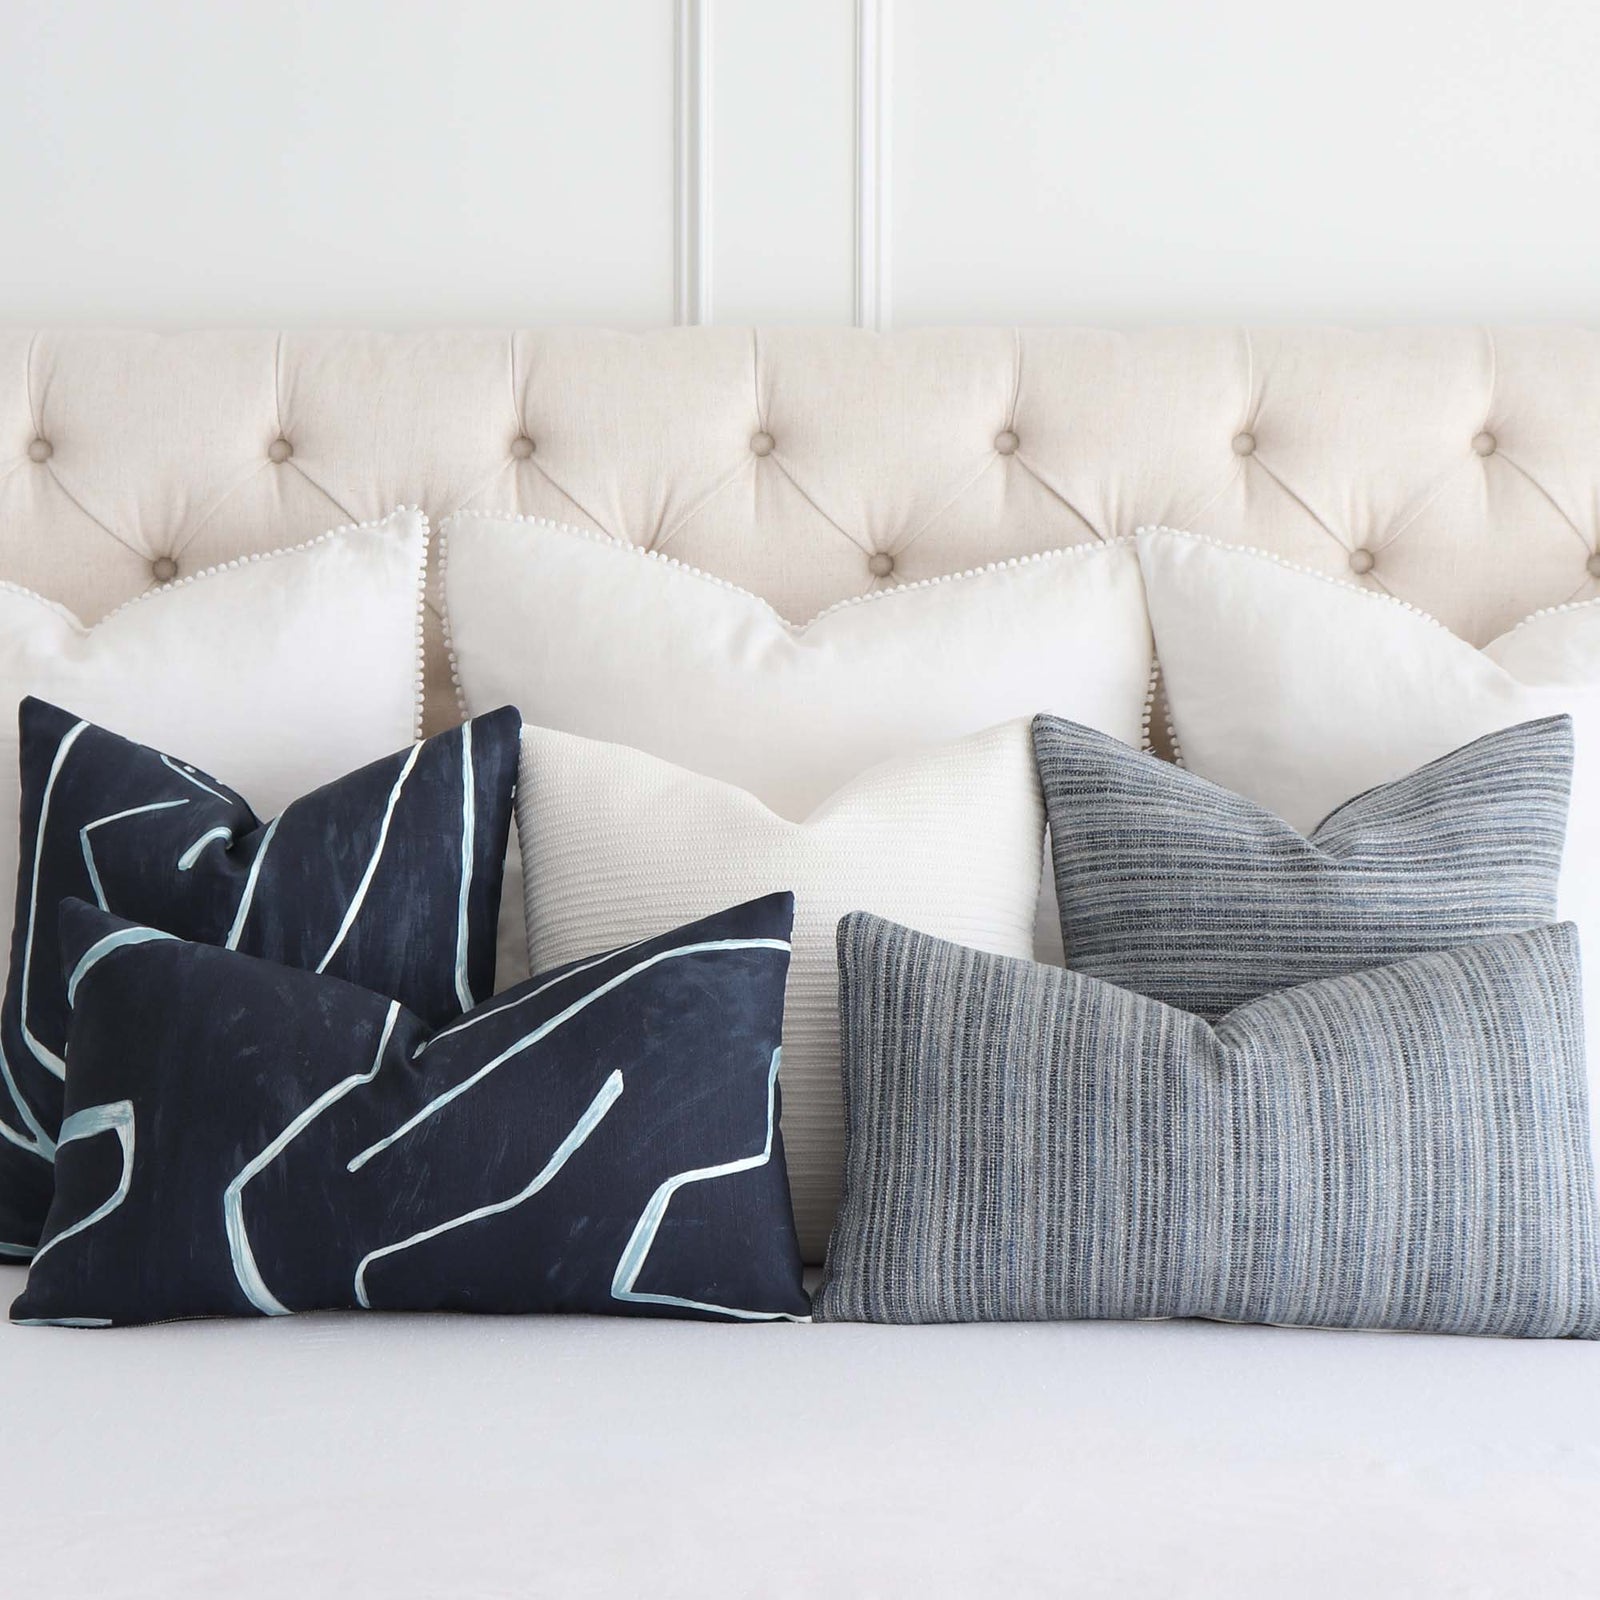 How to Style Couch Pillows to Look Expensive 